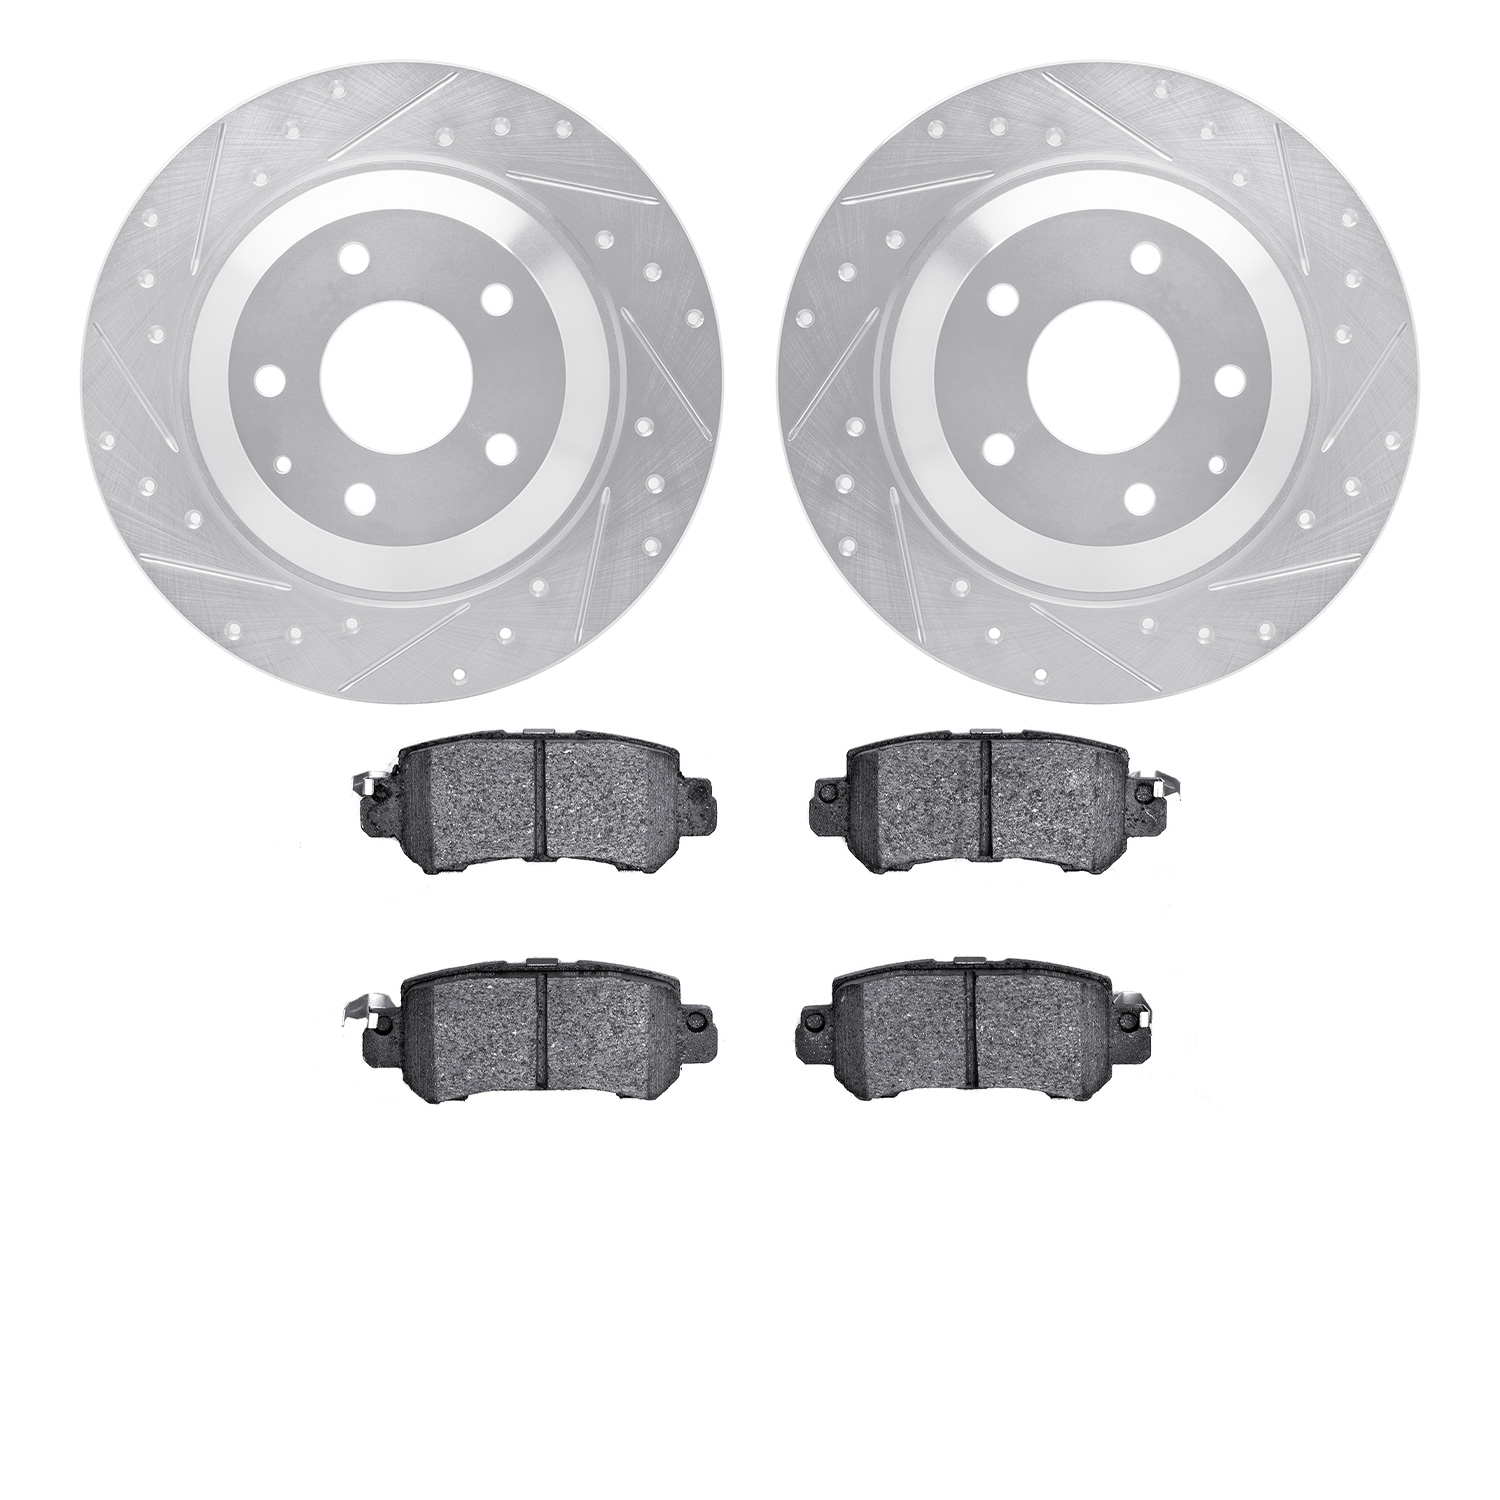 7302-80075 Drilled/Slotted Brake Rotor with 3000-Series Ceramic Brake Pads Kit [Silver], 2013-2015 Ford/Lincoln/Mercury/Mazda, P